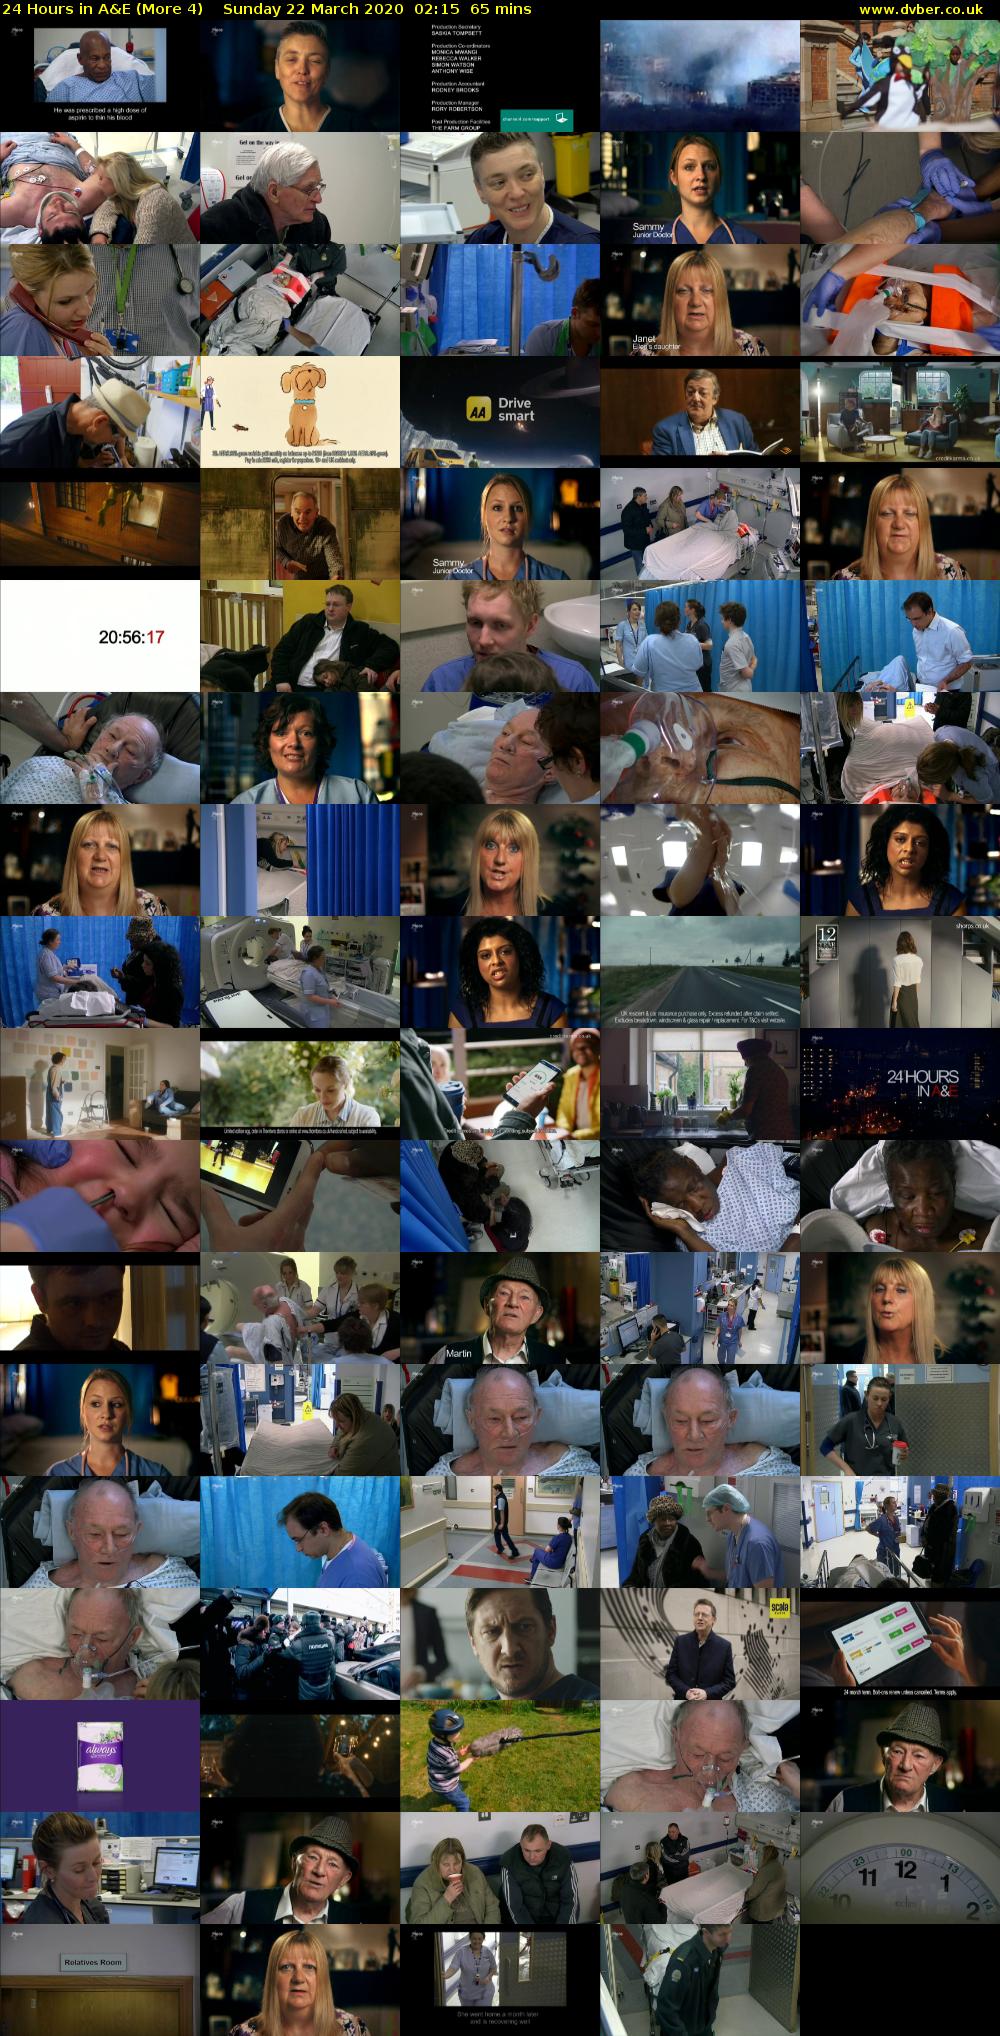 24 Hours in A&E (More 4) Sunday 22 March 2020 02:15 - 03:20